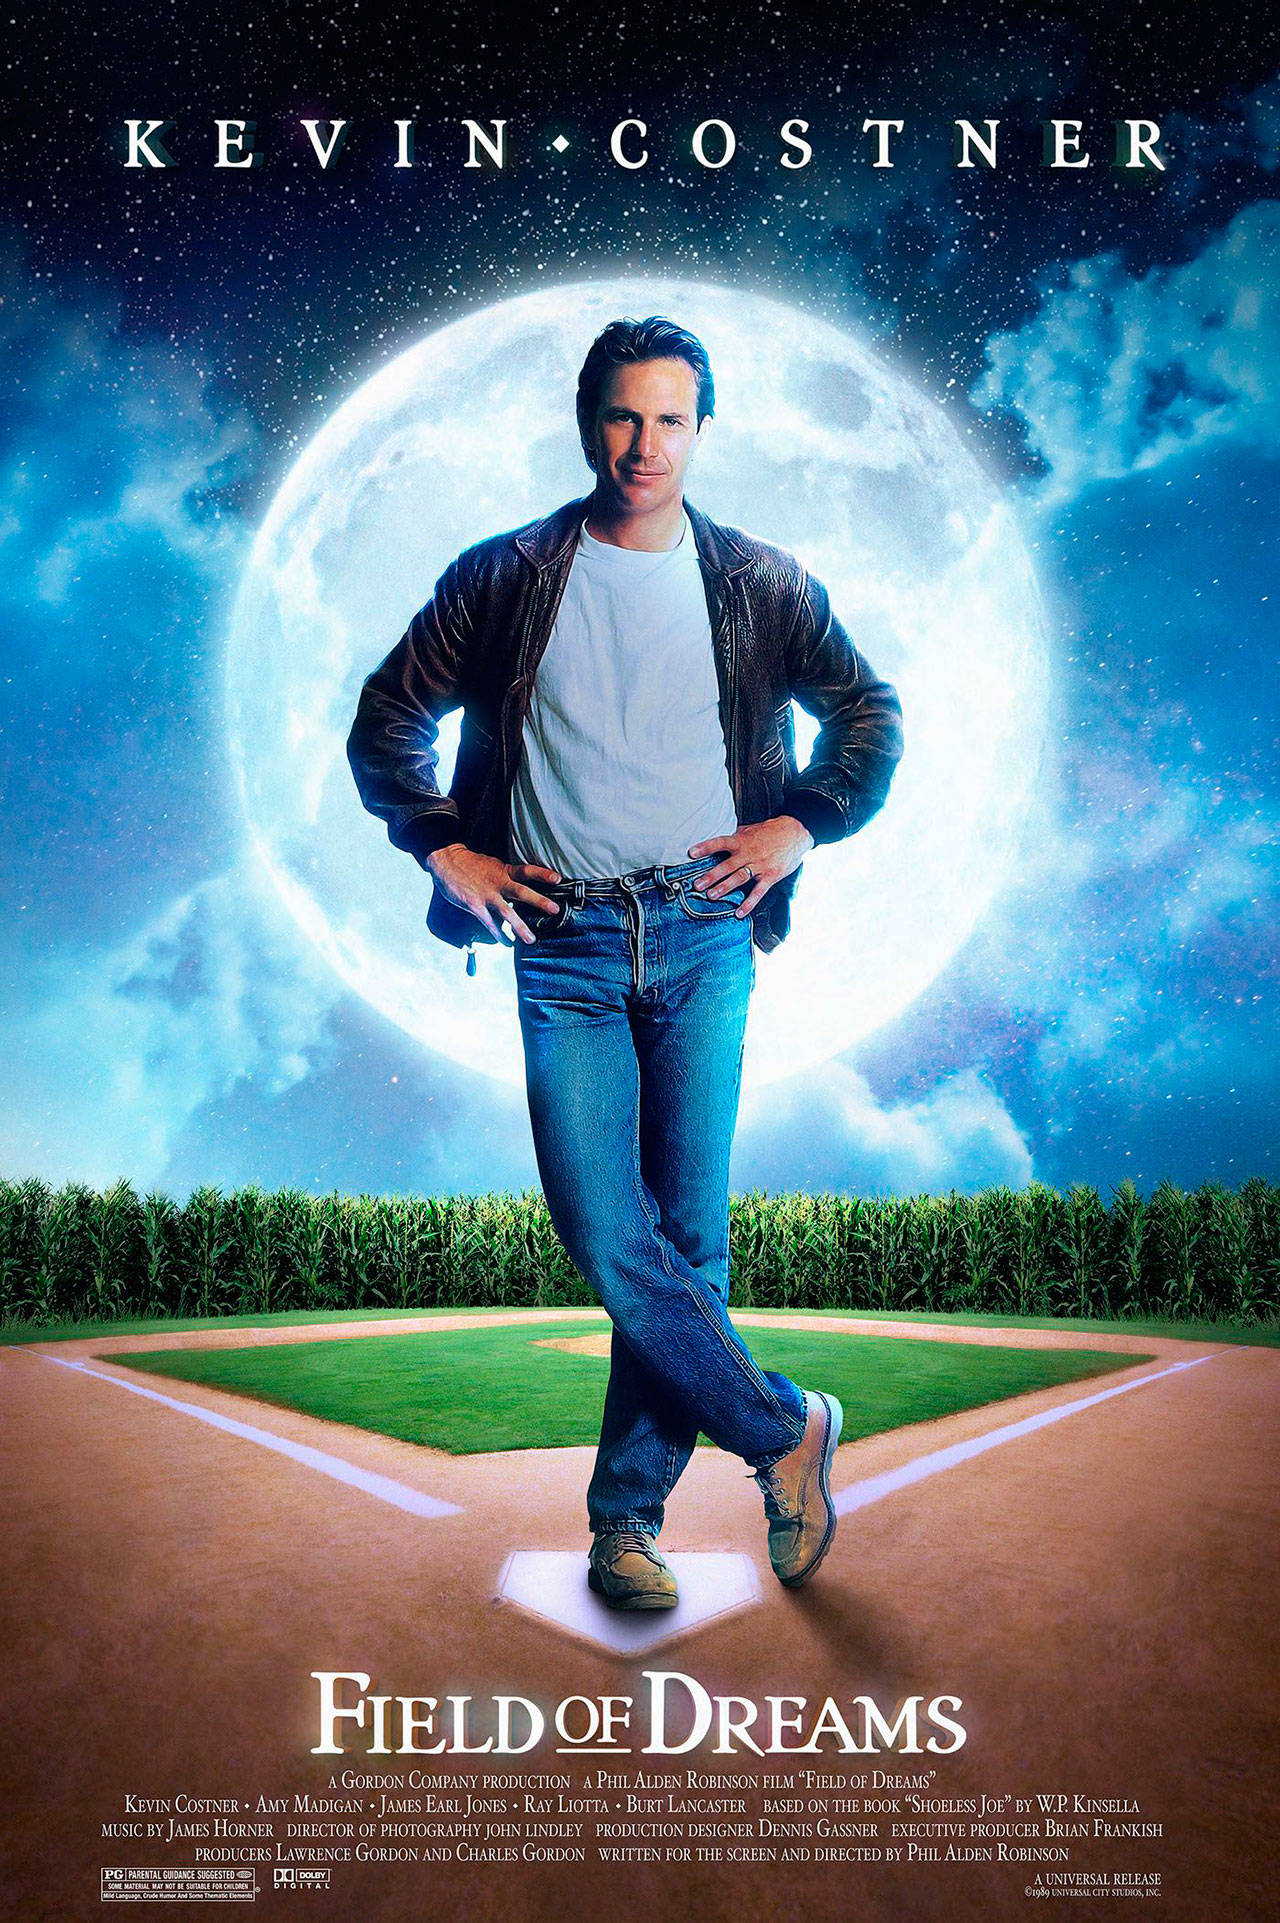 field of dreams movie images